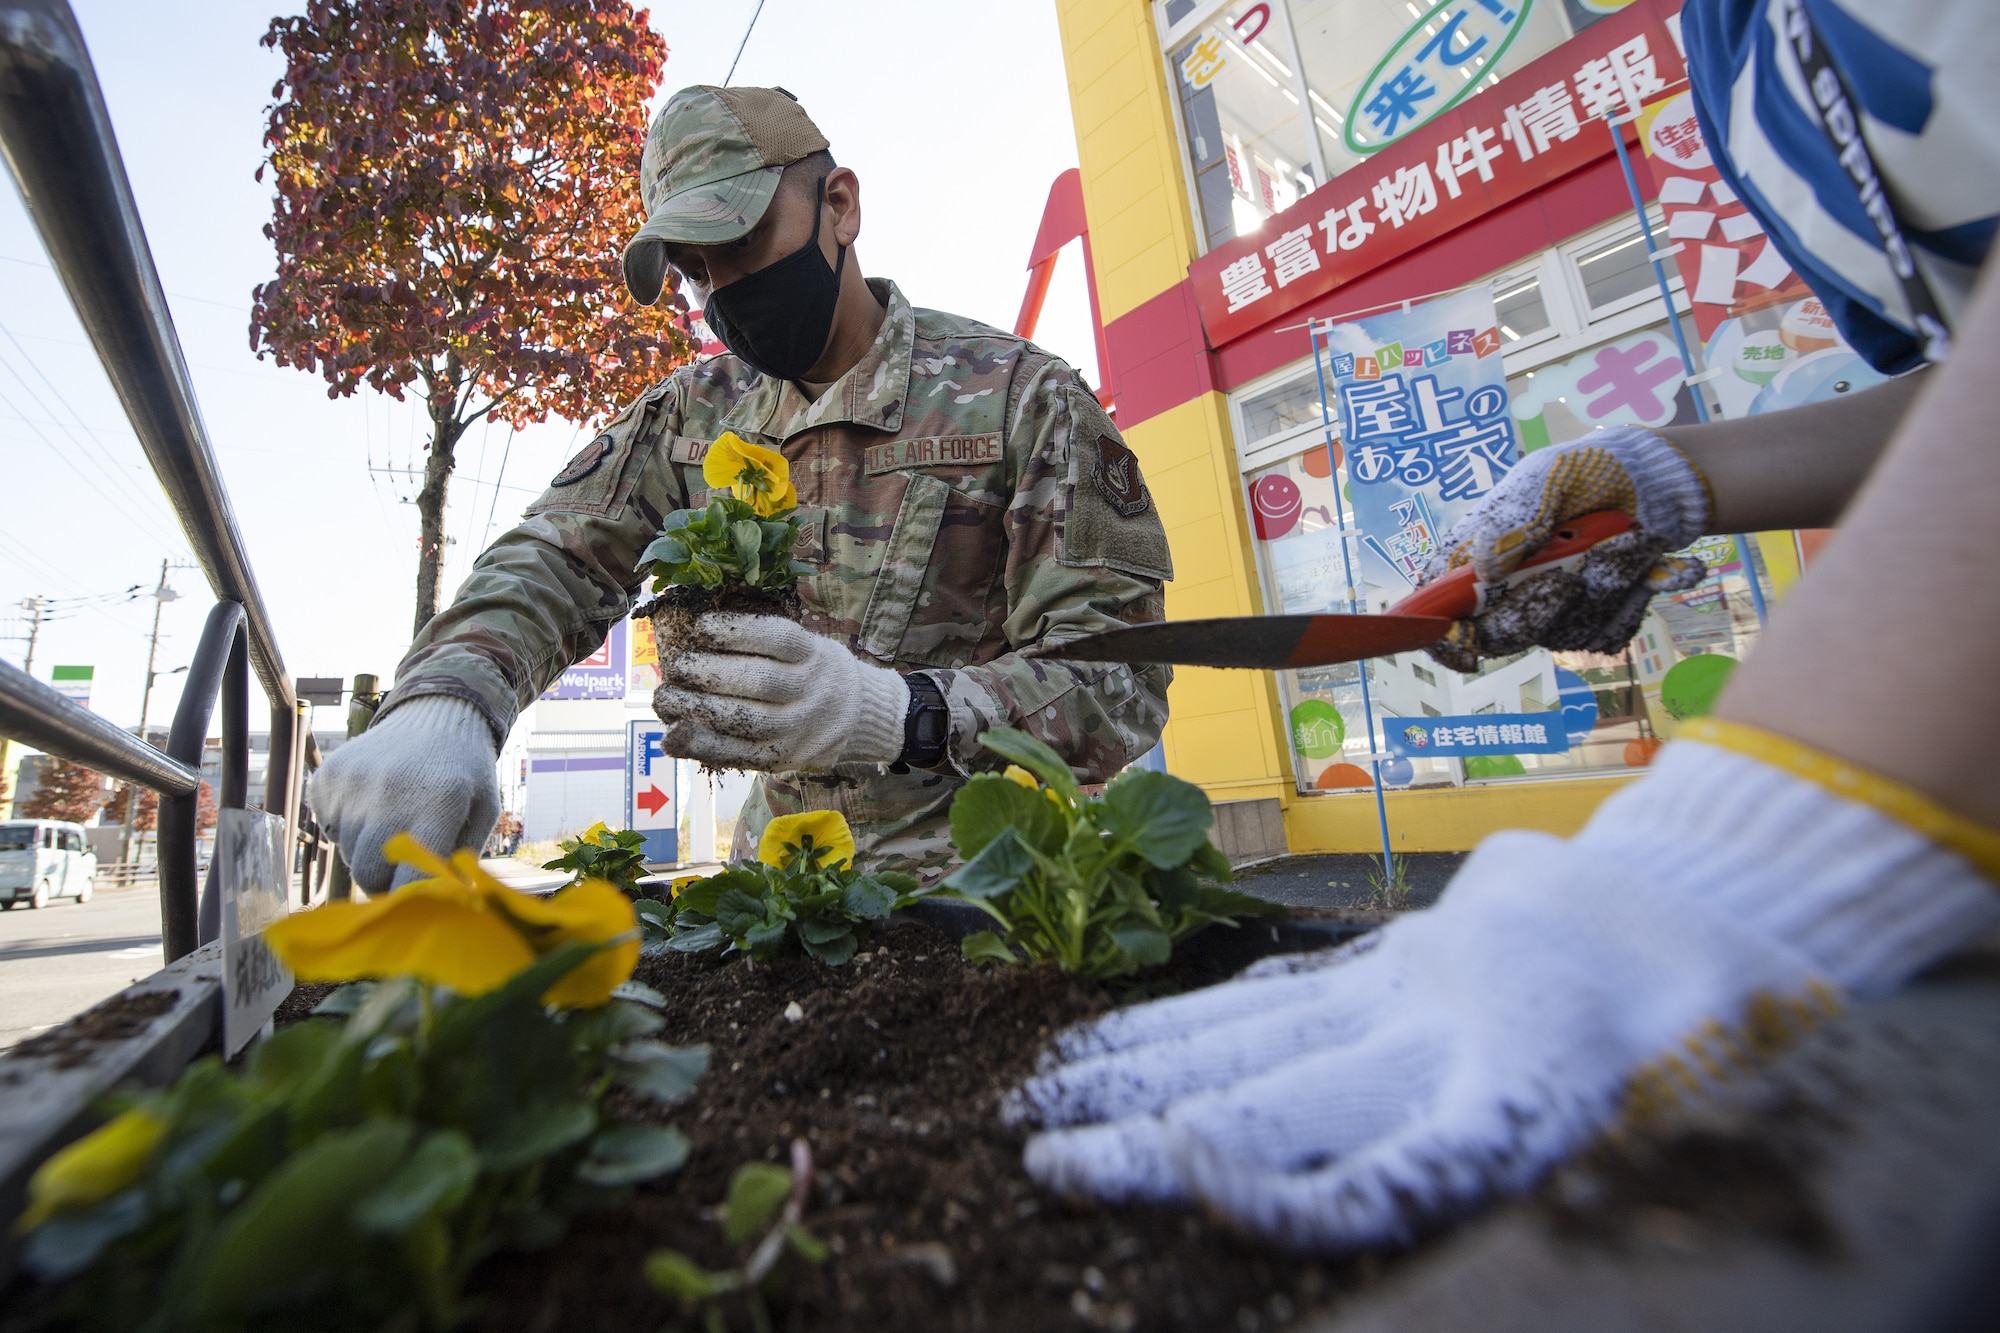 Staff Sgt. Mark Dacumos, 374th Logistics Readiness Squadron passenger travel supervisor, plants flowers with members of the 374th Airlift Wing and off-base community as part of a city beautification project at Fussa City, Japan, Oct. 31, 2022. The project was an opportunity for Team Yokota to strengthen its ties and friendship with Japanese neighbors outside the gates. (U.S. Air Force photo by Tech. Sgt. Christopher Hubenthal)